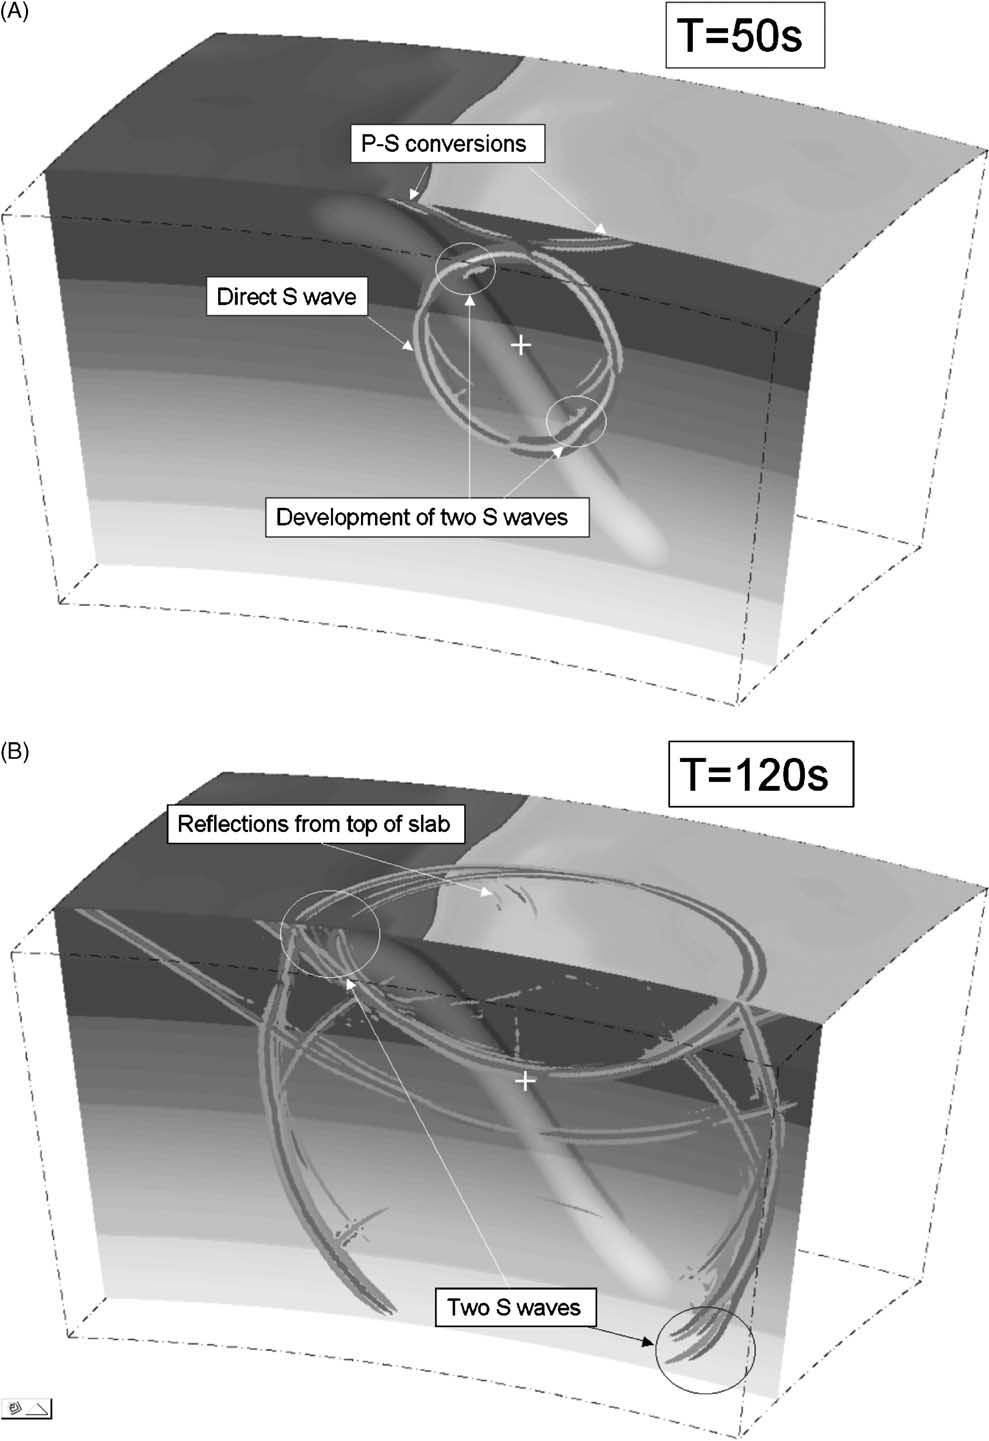 H. Igel et al. / Physics of the Earth and Planetary Interiors 132 (2002) 219 234 229 Fig. 10. Snapshots of slab simulation. The component of the curl perpendicular to the relevant plane is shown.